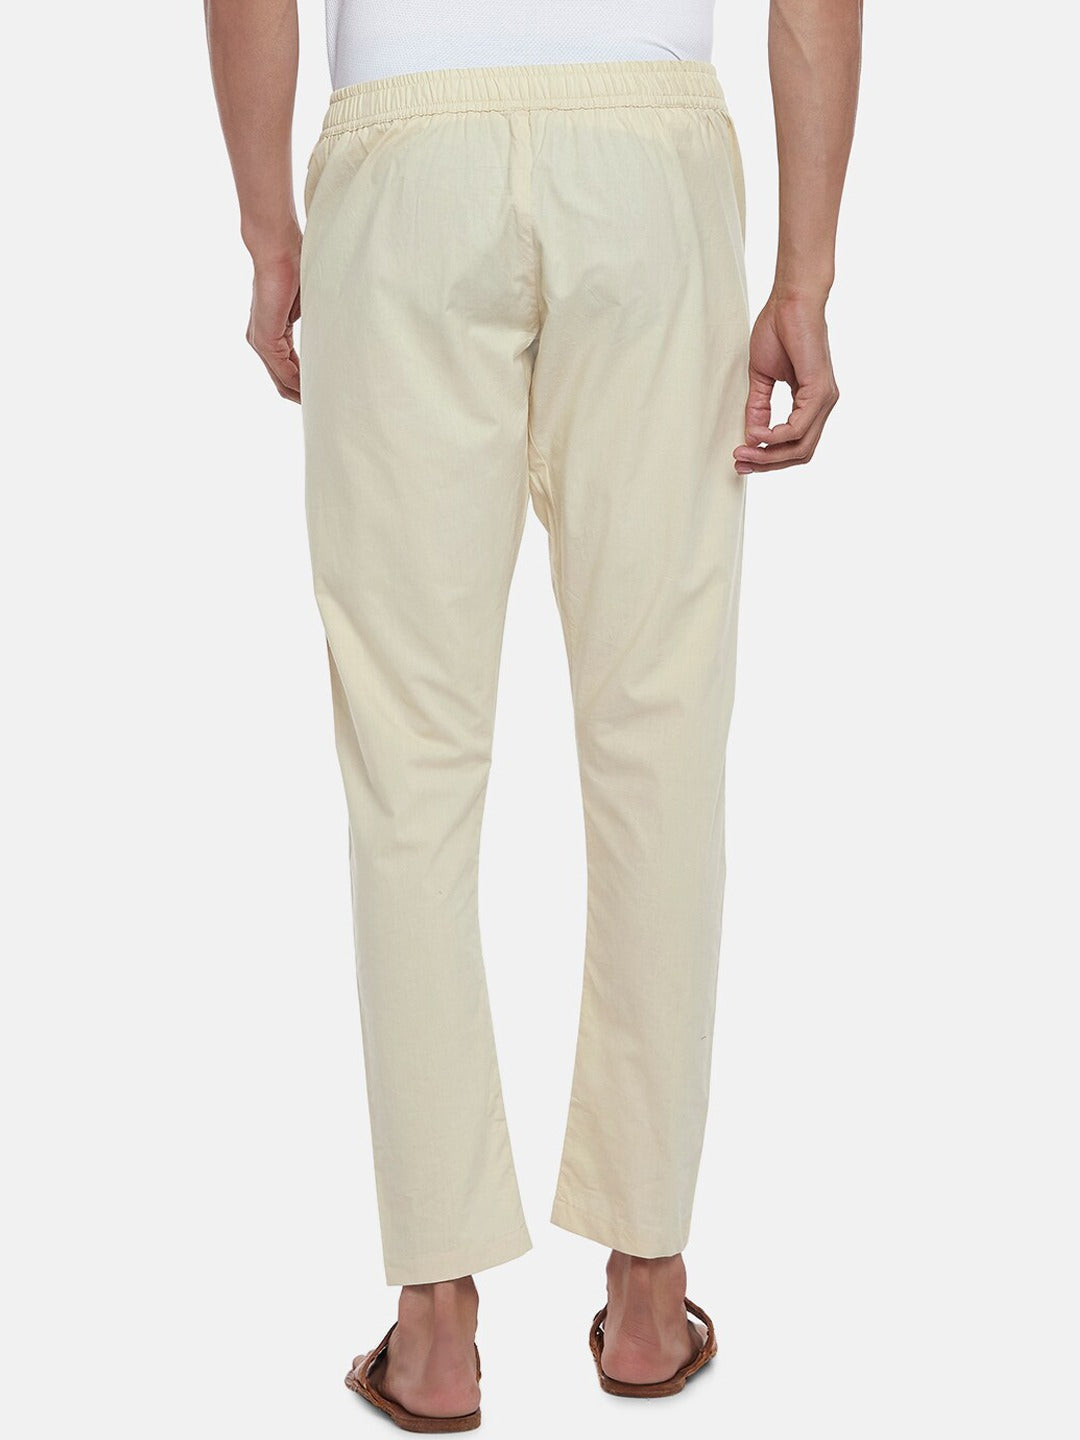 Slim Beige Churidar Pants Indian Clothing in Denver, CO, Aurora, CO, Boulder, CO, Fort Collins, CO, Colorado Springs, CO, Parker, CO, Highlands Ranch, CO, Cherry Creek, CO, Centennial, CO, and Longmont, CO. NATIONWIDE SHIPPING USA- India Fashion X